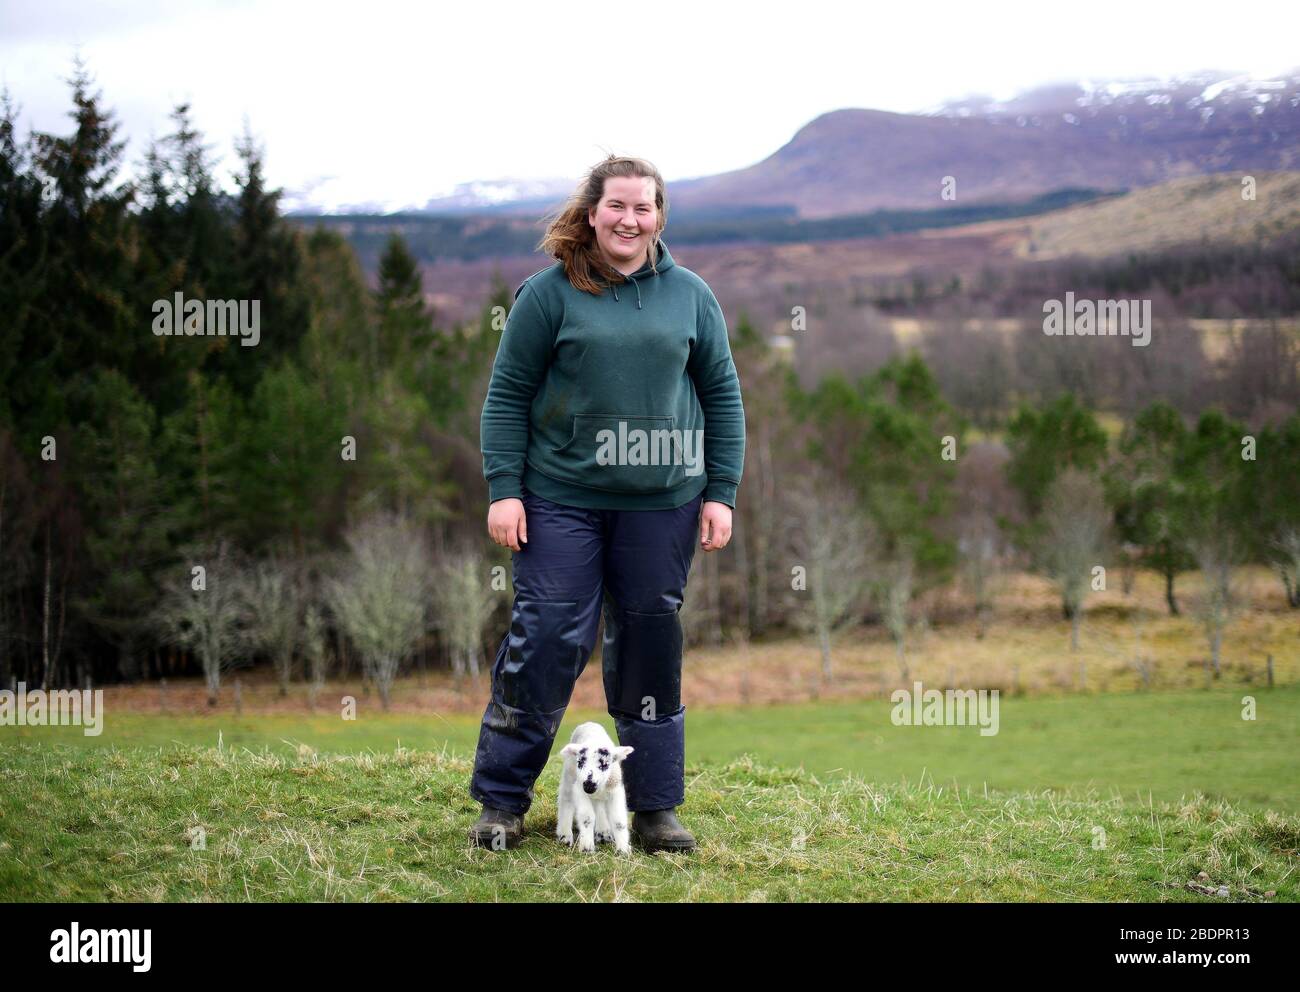 EDITORIAL USE ONLY Chloe Malcolm, aged 25, tends to a new lamb as she has been appointed as manager of one of Scotland's biggest upland farming operations. She will oversee 12,000 acres of hill farm and 600 sheep in Glenshero and Inverlair for Jahama Highland Estates, part of the GFG Alliance industrial group. Stock Photo